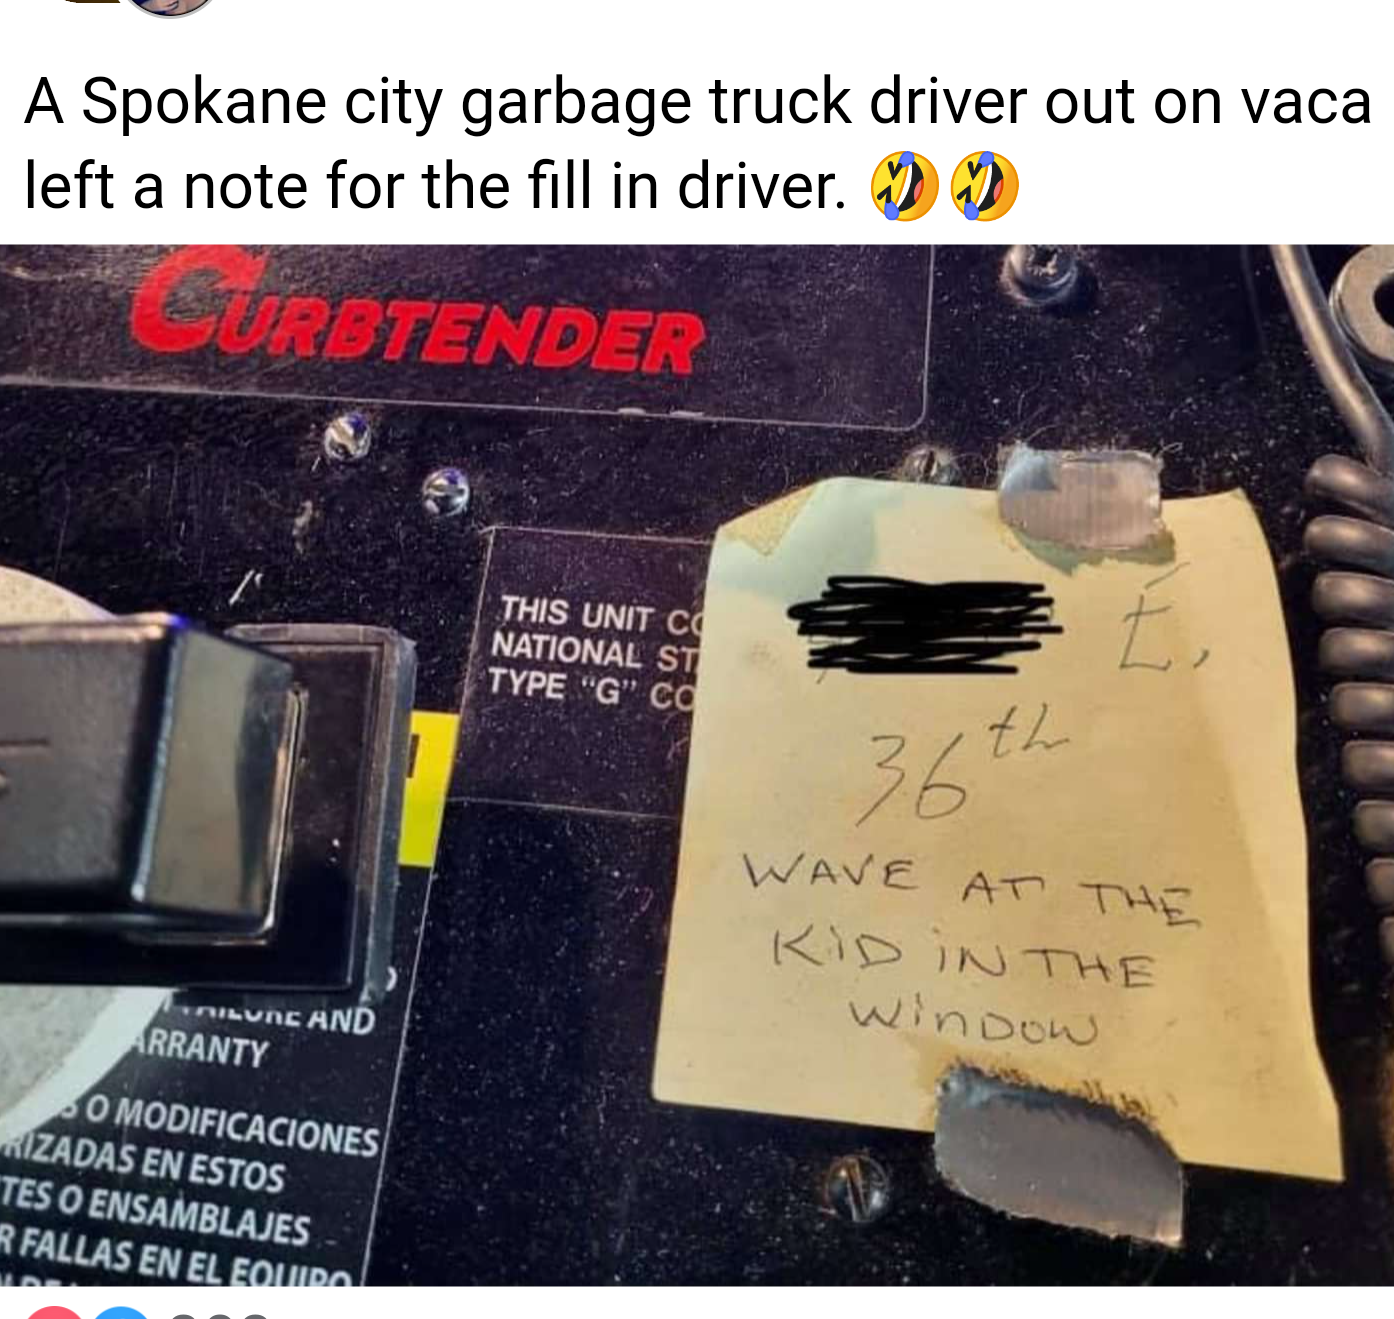 garbage man who wrote a reminder to wave to a window